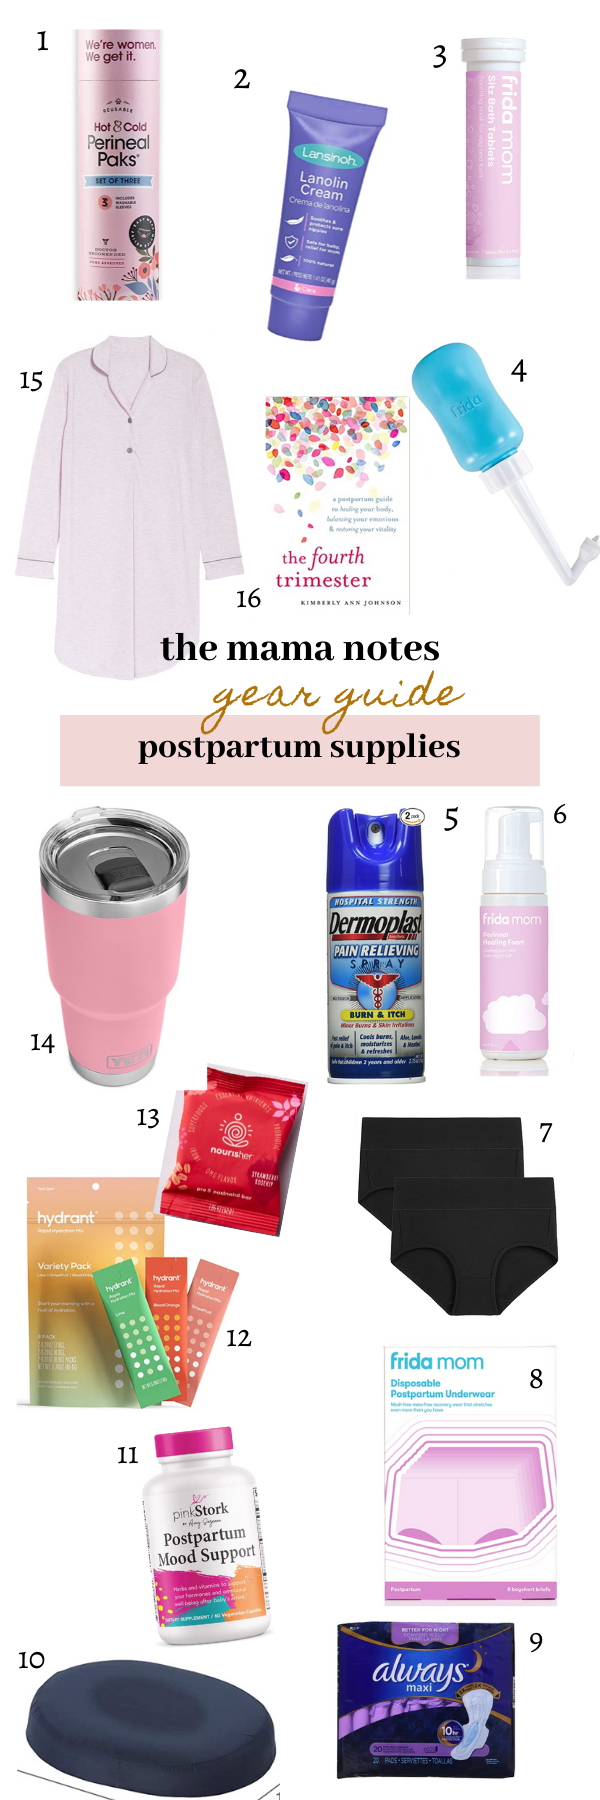 10 Things You Would Experience During Postpartum Period - Post